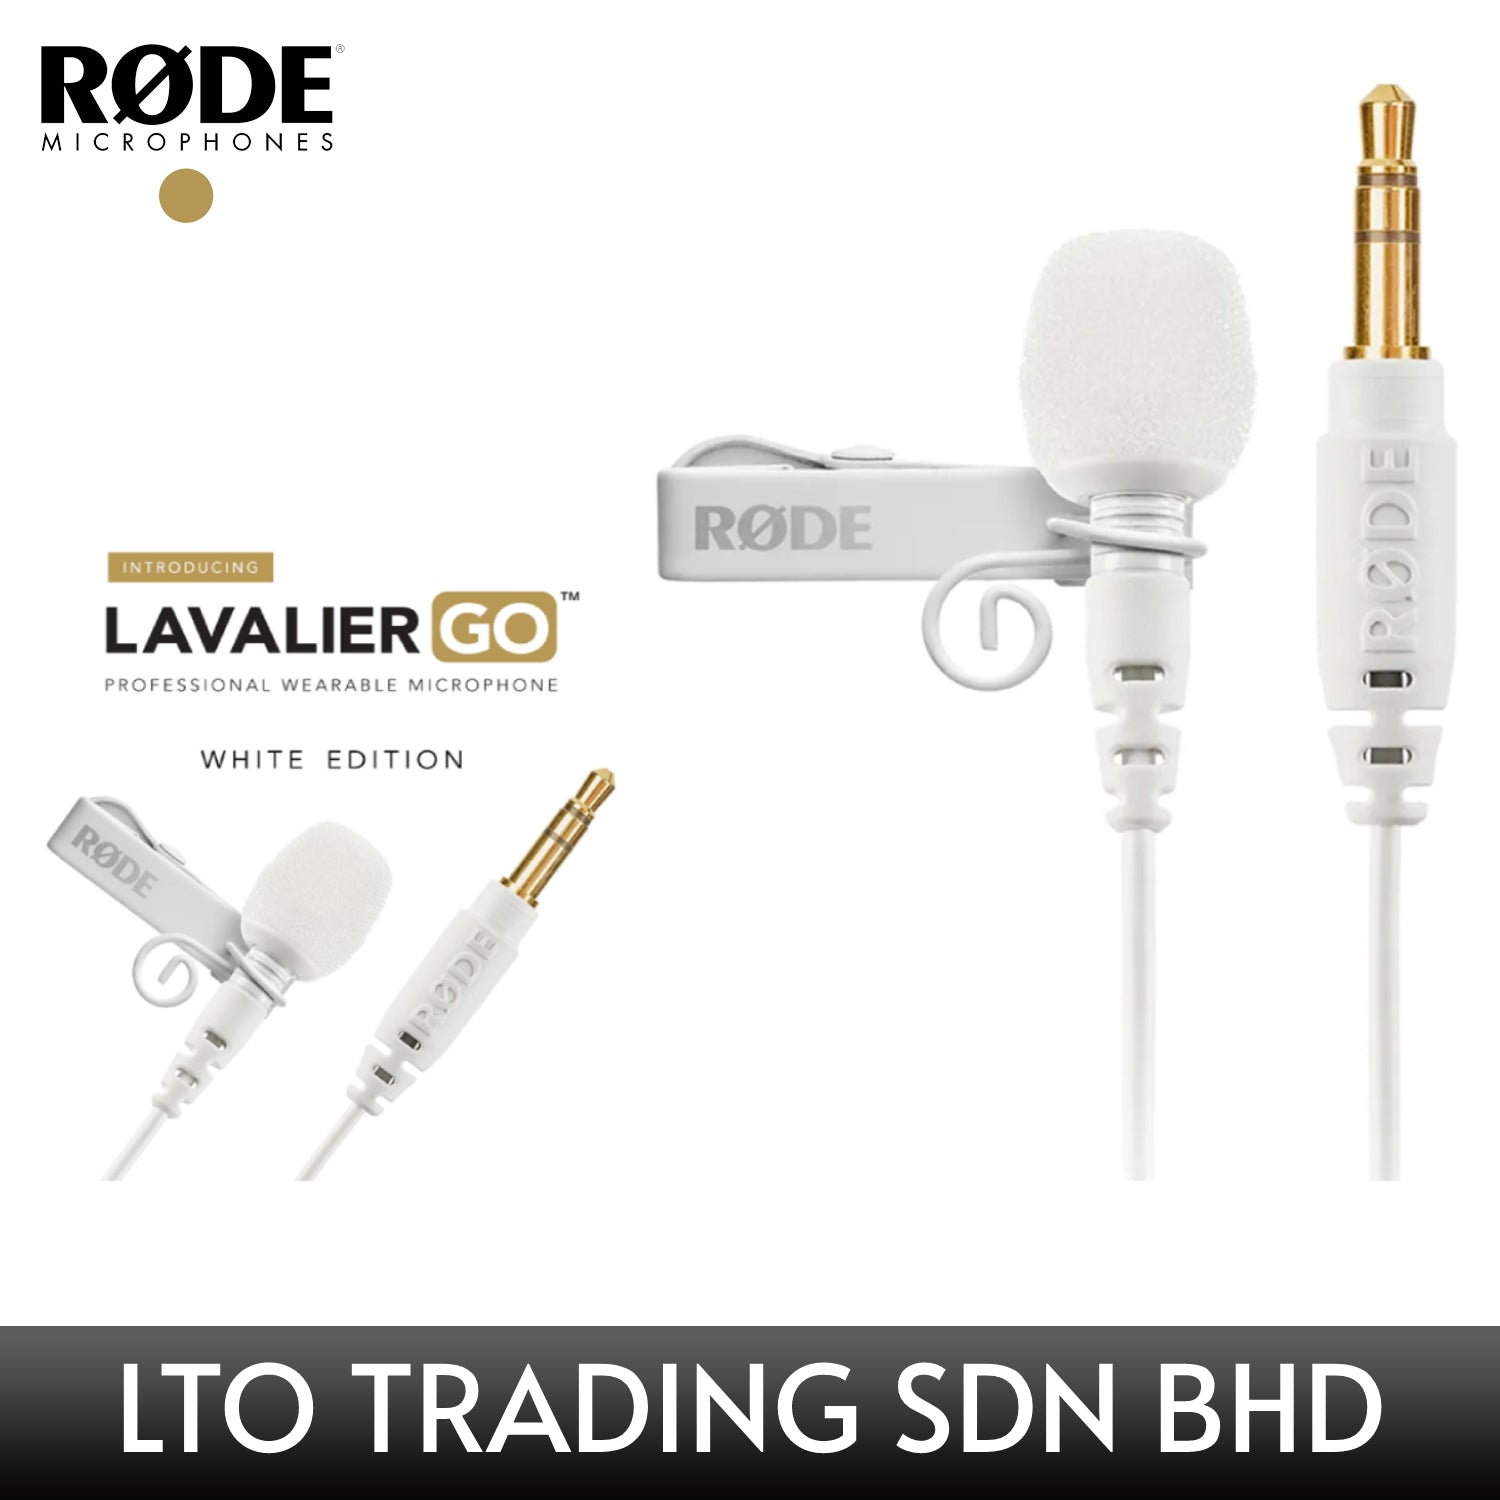 Rode Lavalier GO Professional Wearable Microphone - White